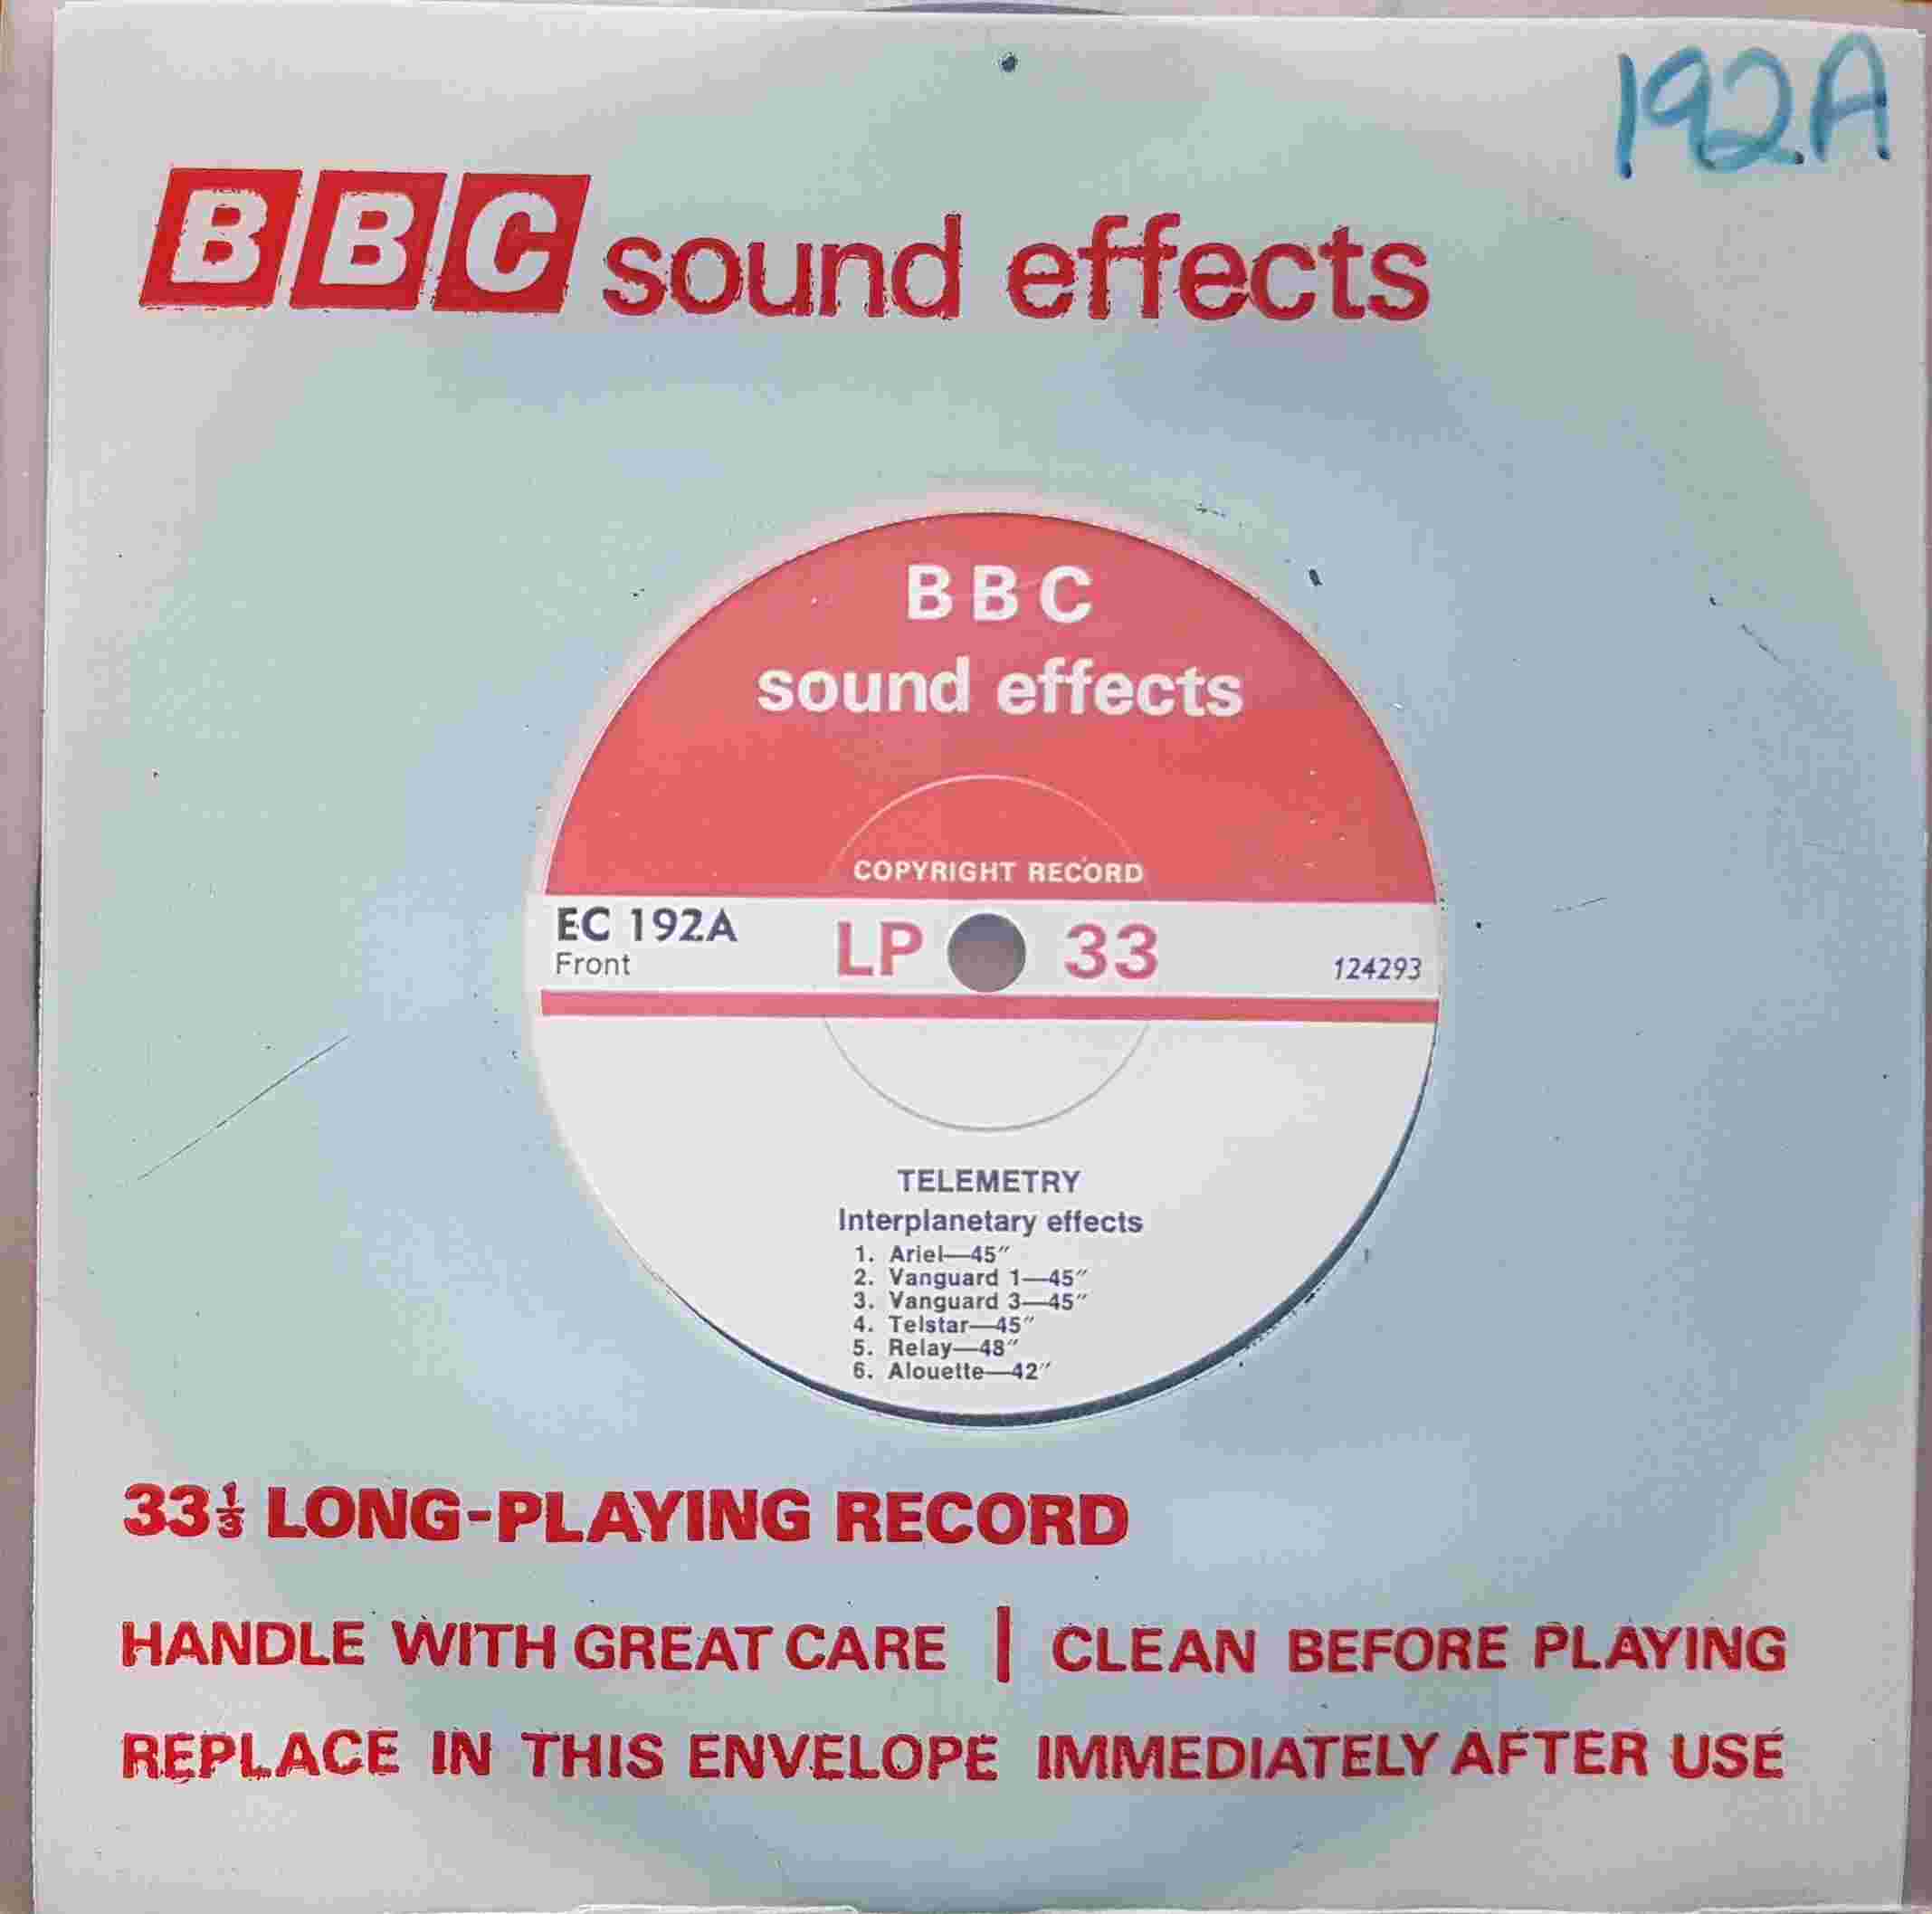 Picture of EC 192A Telemetry - Interplanetary effects by artist Not registered from the BBC singles - Records and Tapes library